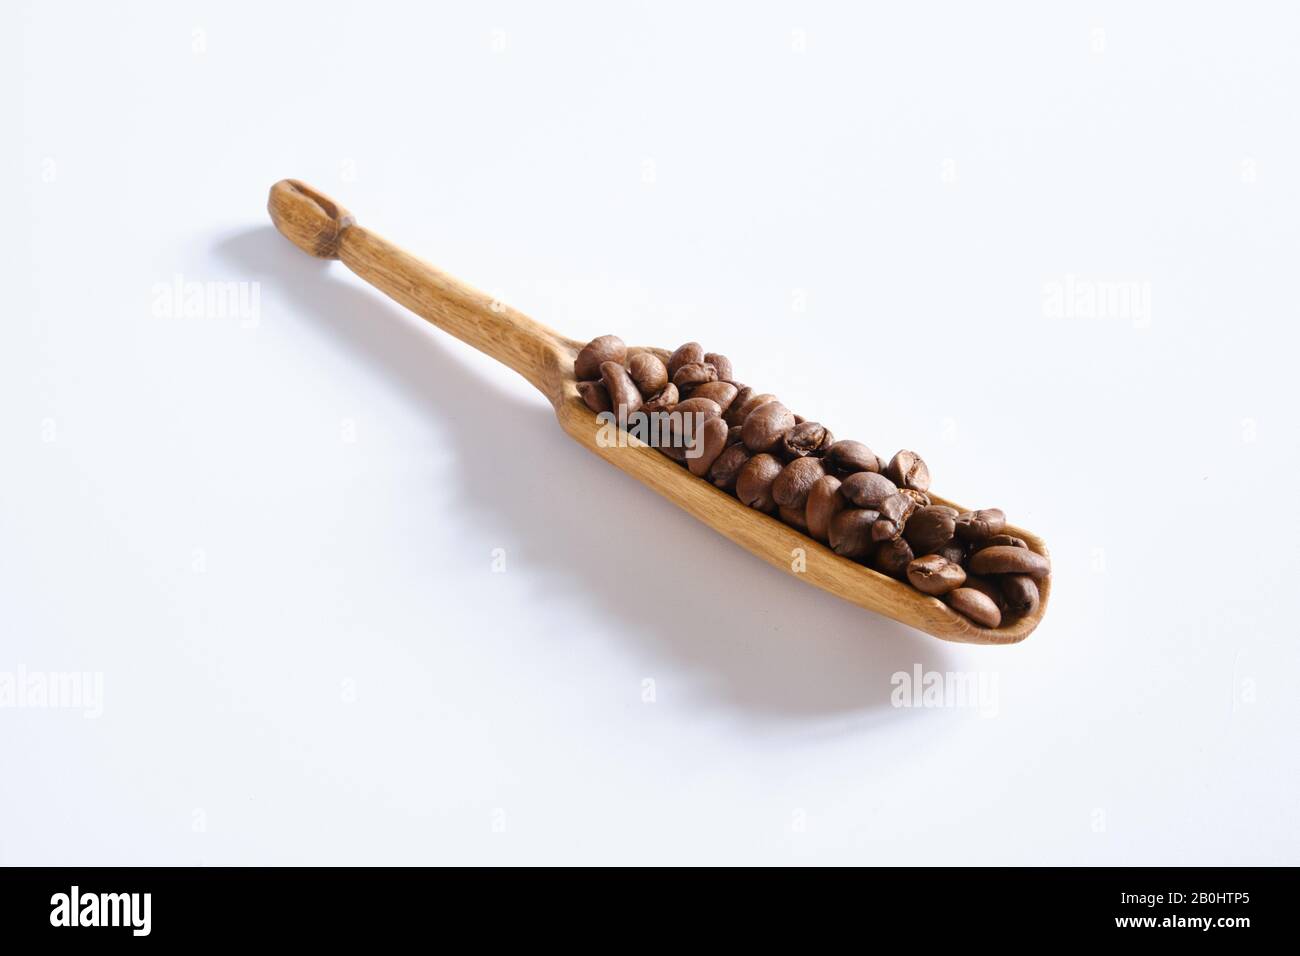 Handmade artisan  blackthorn wood coffee scoop spoon with bean detailing filled with coffee beans on handle white background Stock Photo